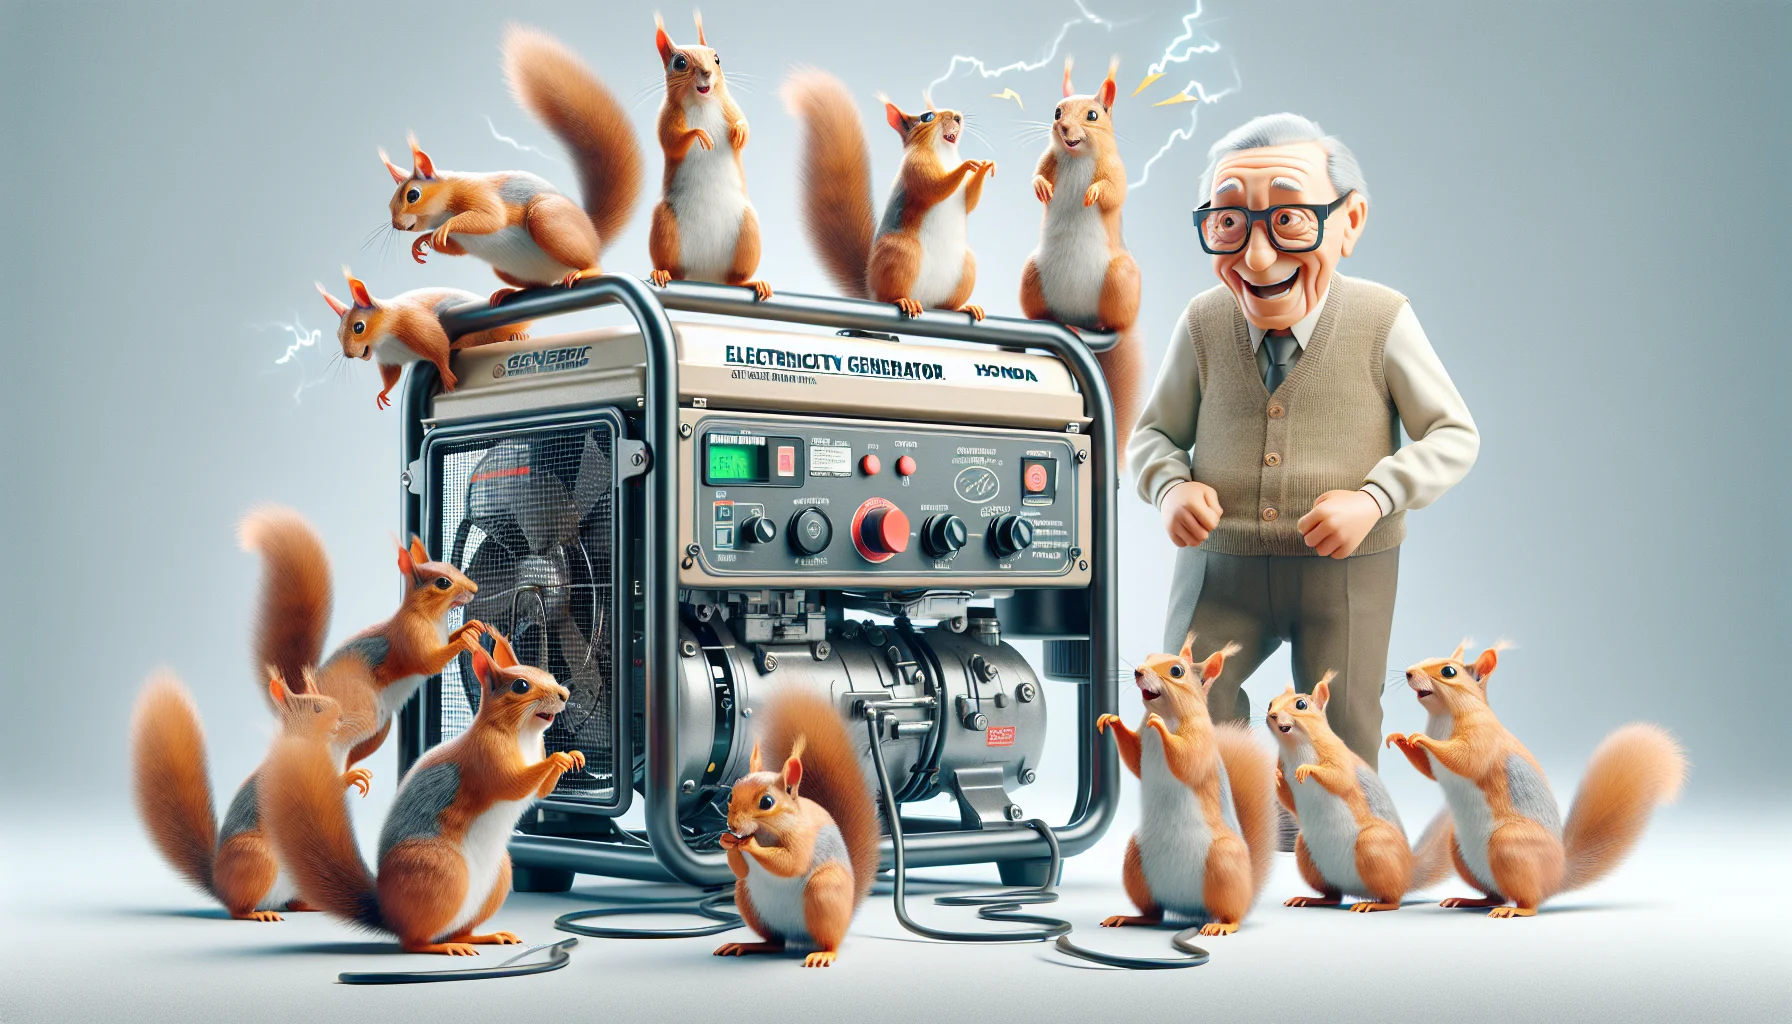 Create a realistic and humorous scene that features a generic portable electricity generator (similar in size and shape to the Honda EU-2200i) being operated by an enthusiastic band of squirrels. The scene should be cheerful and light-hearted, showing the squirrels scampering around and on top of the generator as if they are the ones running it, with little bolts of cartoon-style electricity occasionally sparking out. Also include an elderly squirrel wearing spectacles, standing to the side with an approving smile as it supervises the shenanigans. This image should represent the theme of generating electricity in a fun and quirky way.